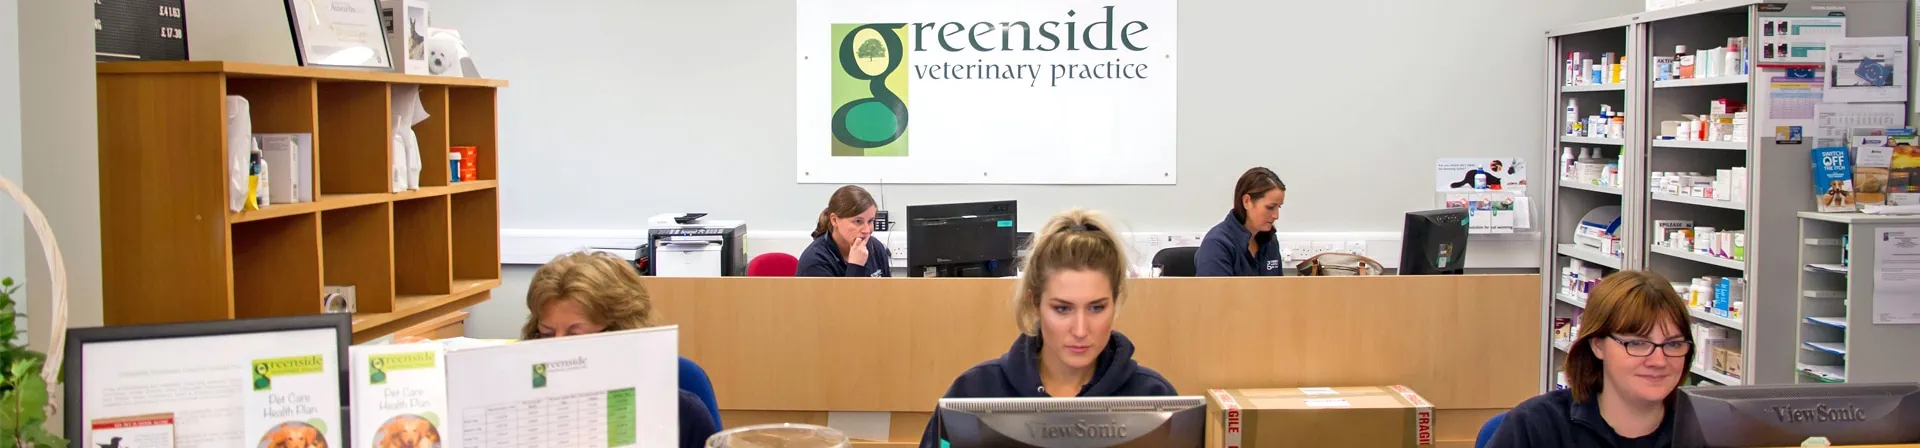 About Greenside Vets in St Boswells and in Jedburgh